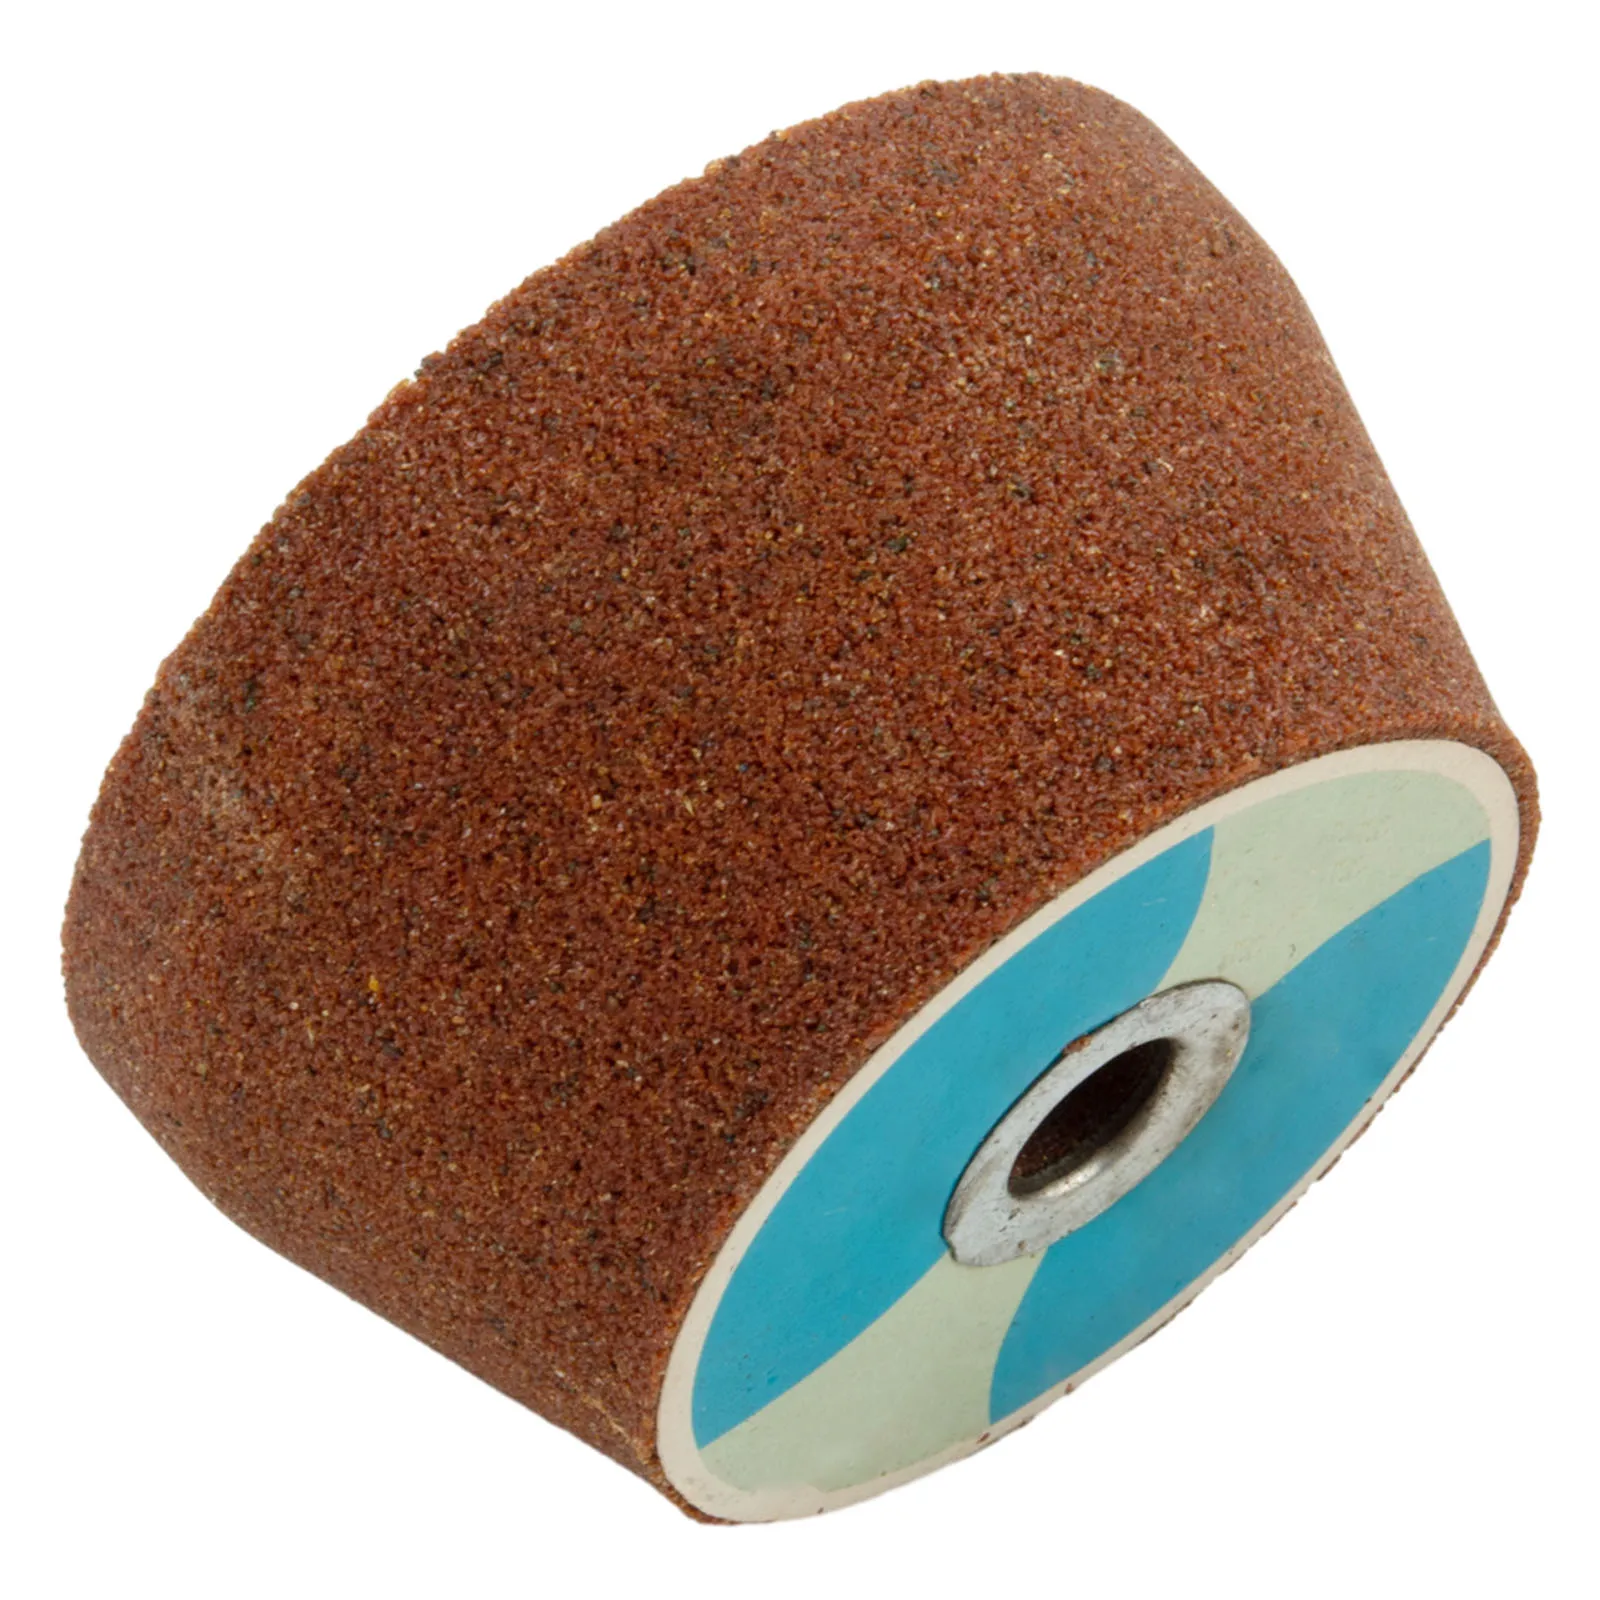 1 Pcs Grinding Wheel Double Durability White Corundum 100 Type Angle Grinder Fast Sanding Speed M10 Orange High Quality sp12 14 20 30 40 50mm 2 times diameter fast water spray bit high effective indexable inserts type u drill violent drill bits